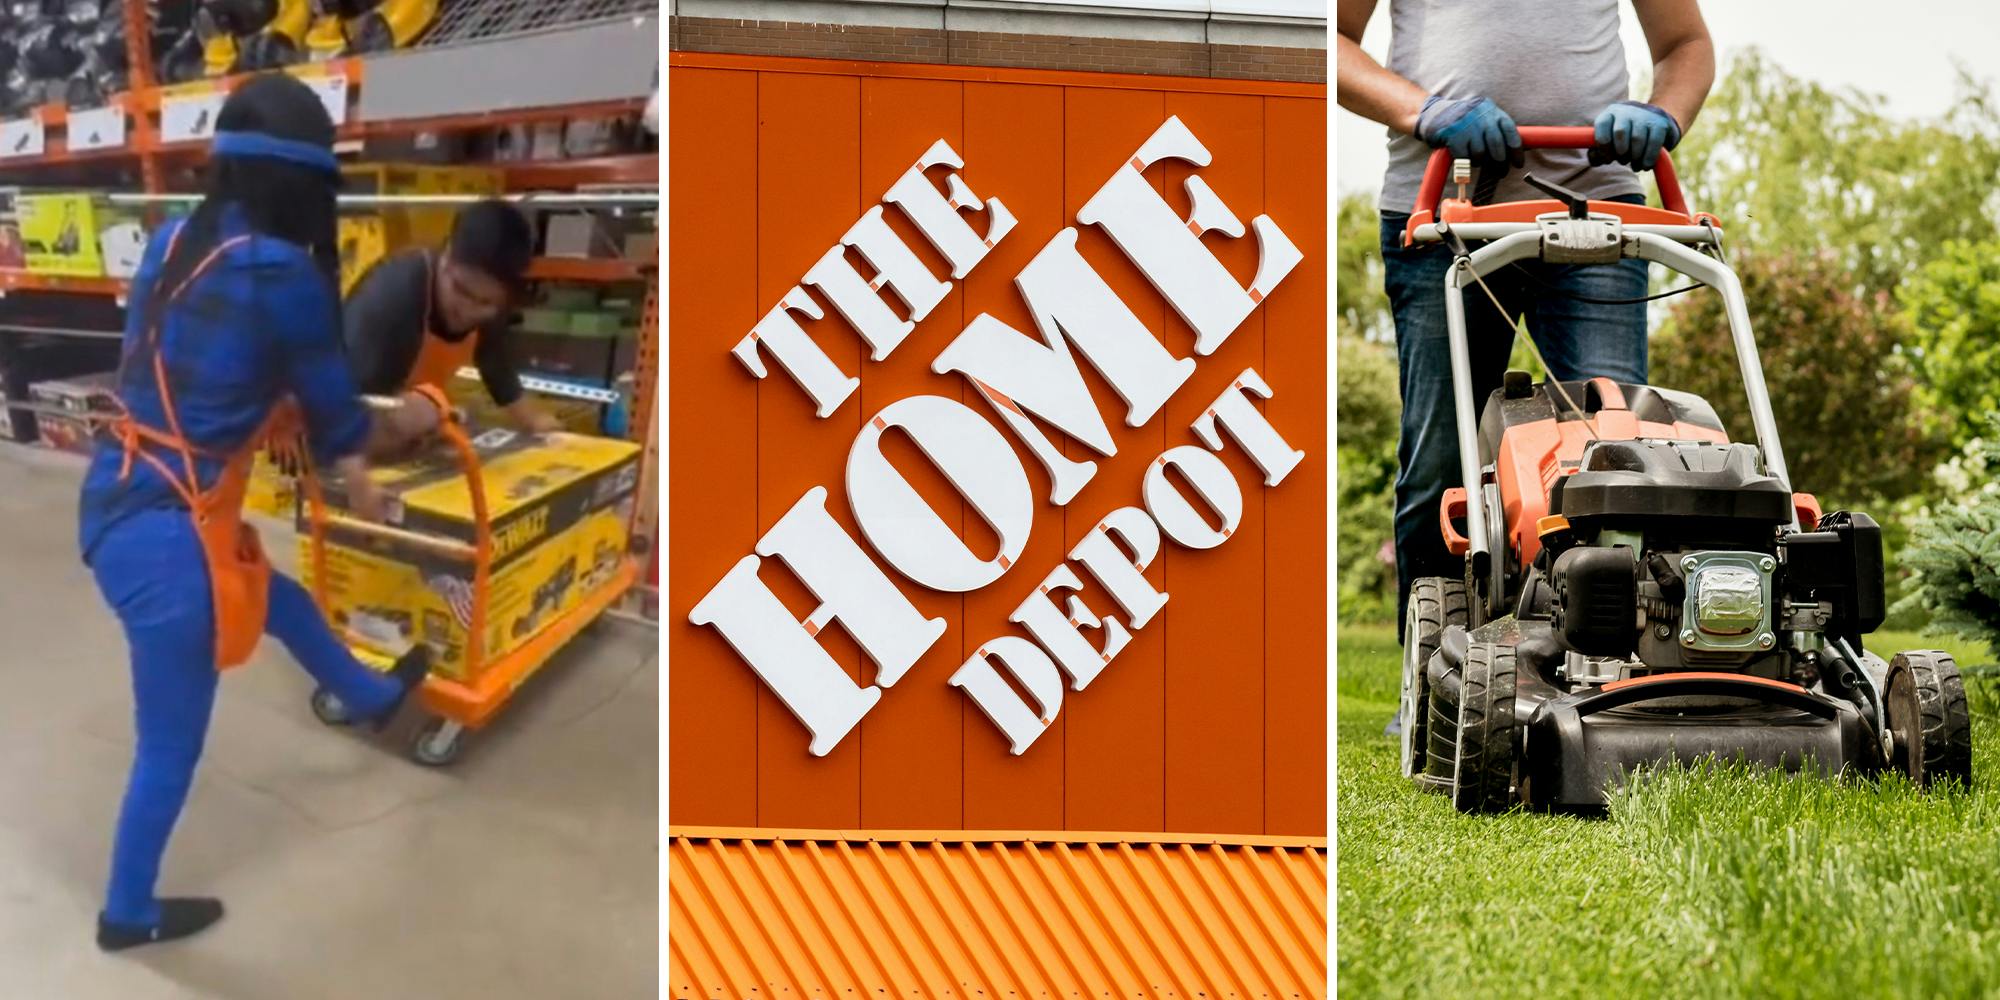 Man says $700 lawnmowers are on ‘hidden clearance’ at Home Depot for just $67